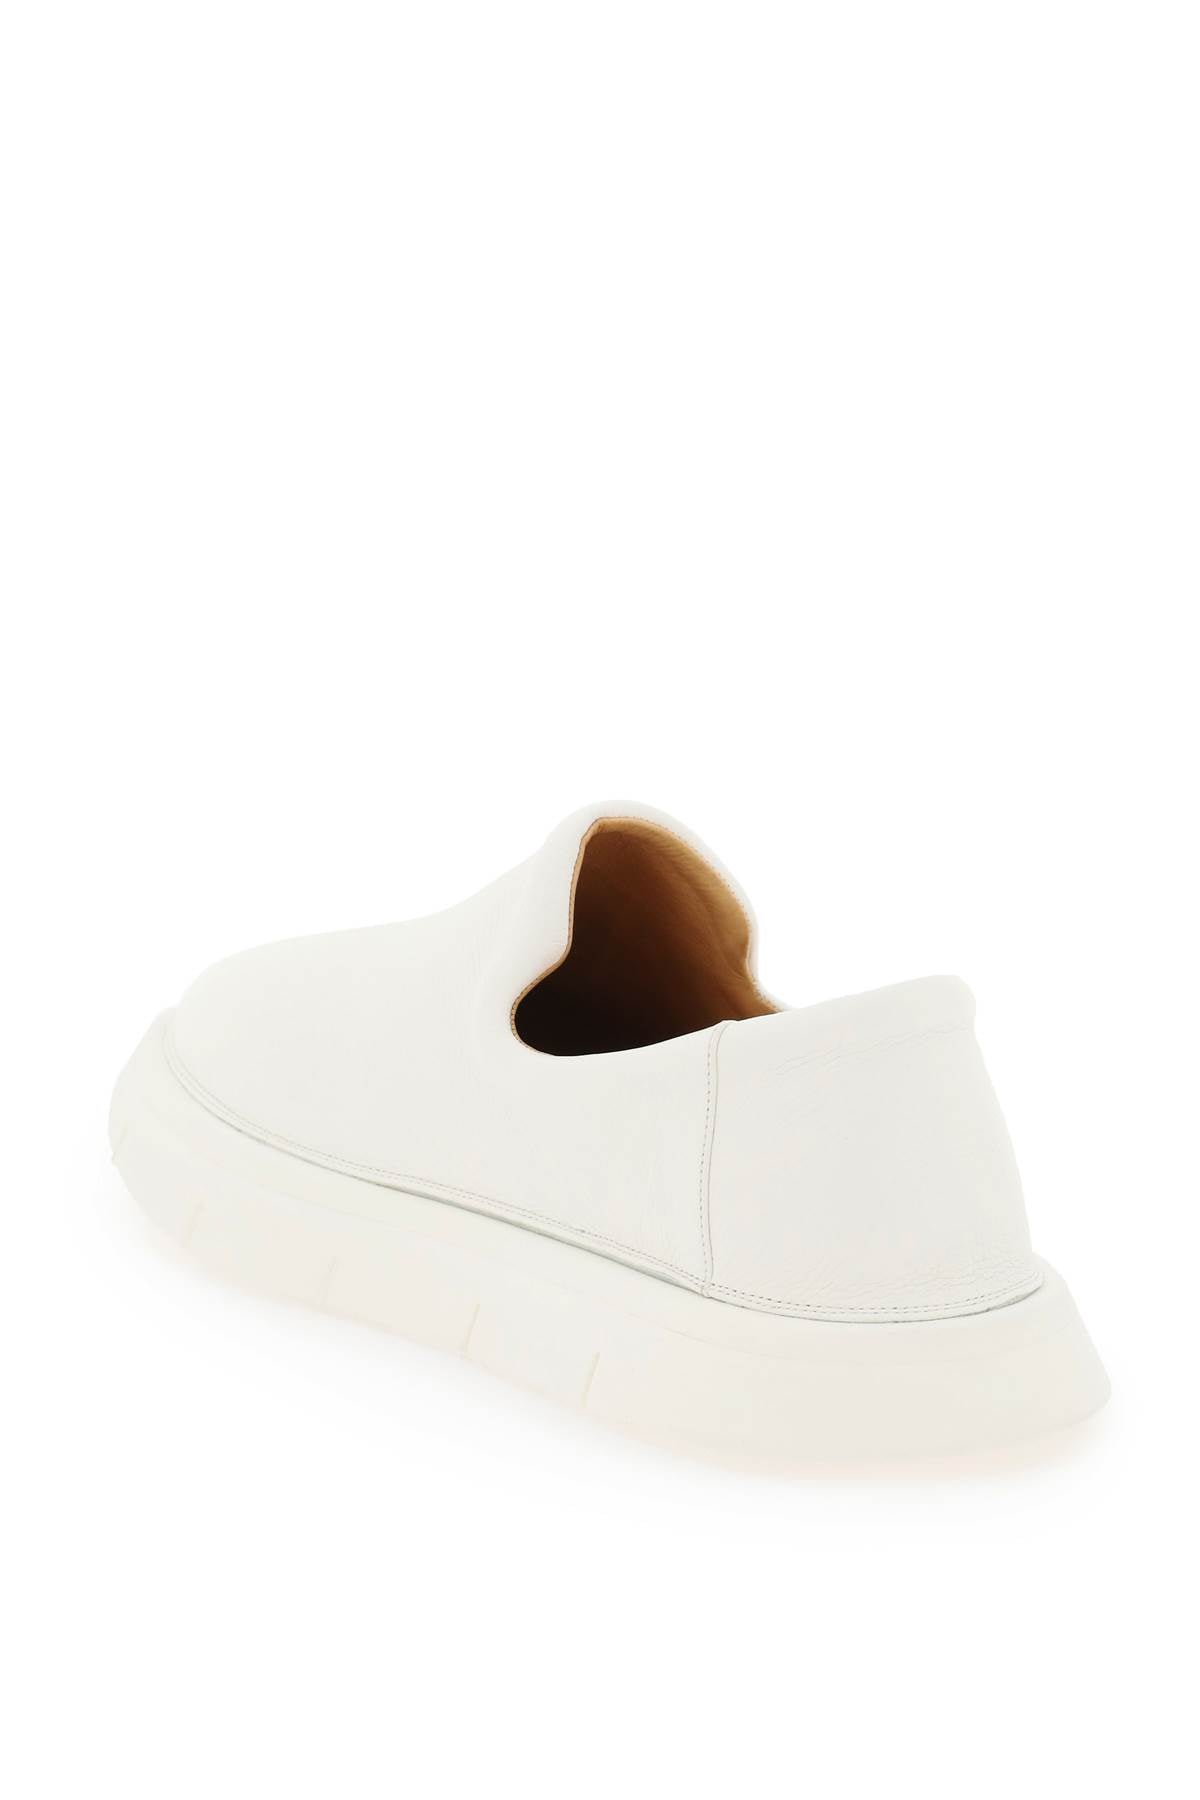 Marsell 'intagliata' grained leather slip-on shoes-2